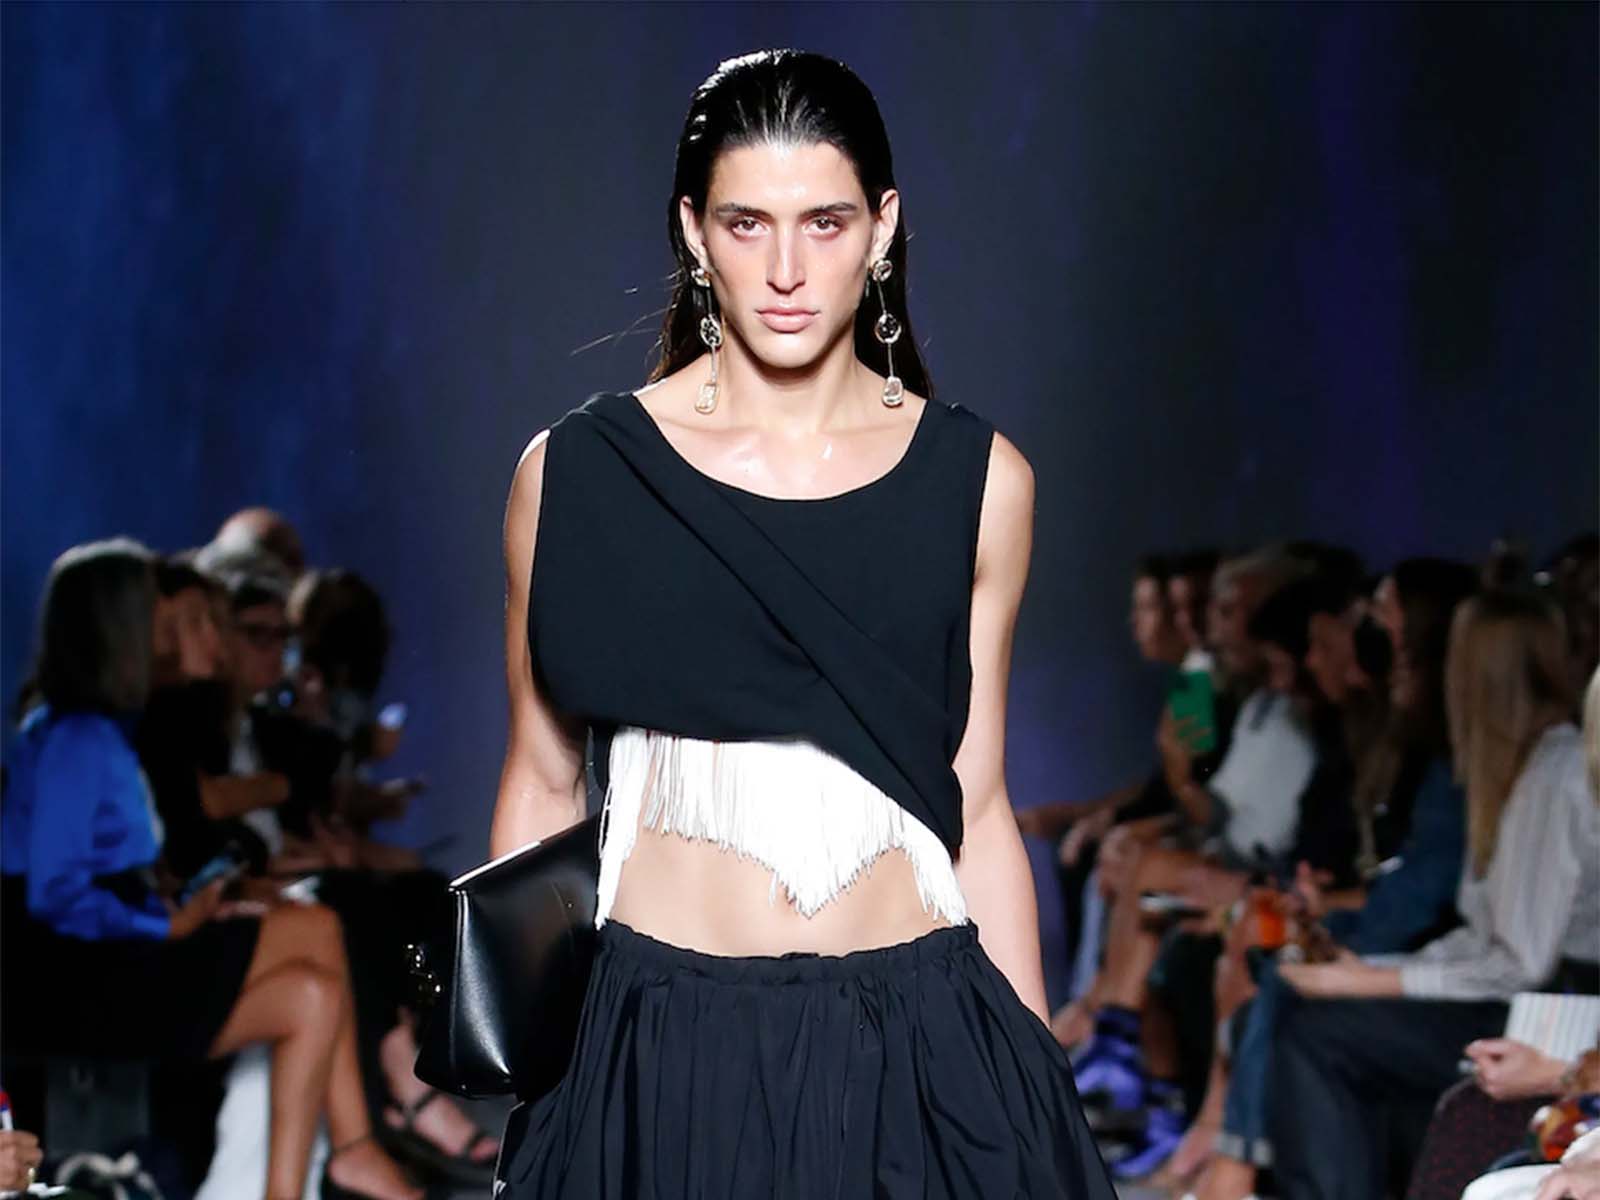 Proenza Schouler is celebrating…and NY knows it